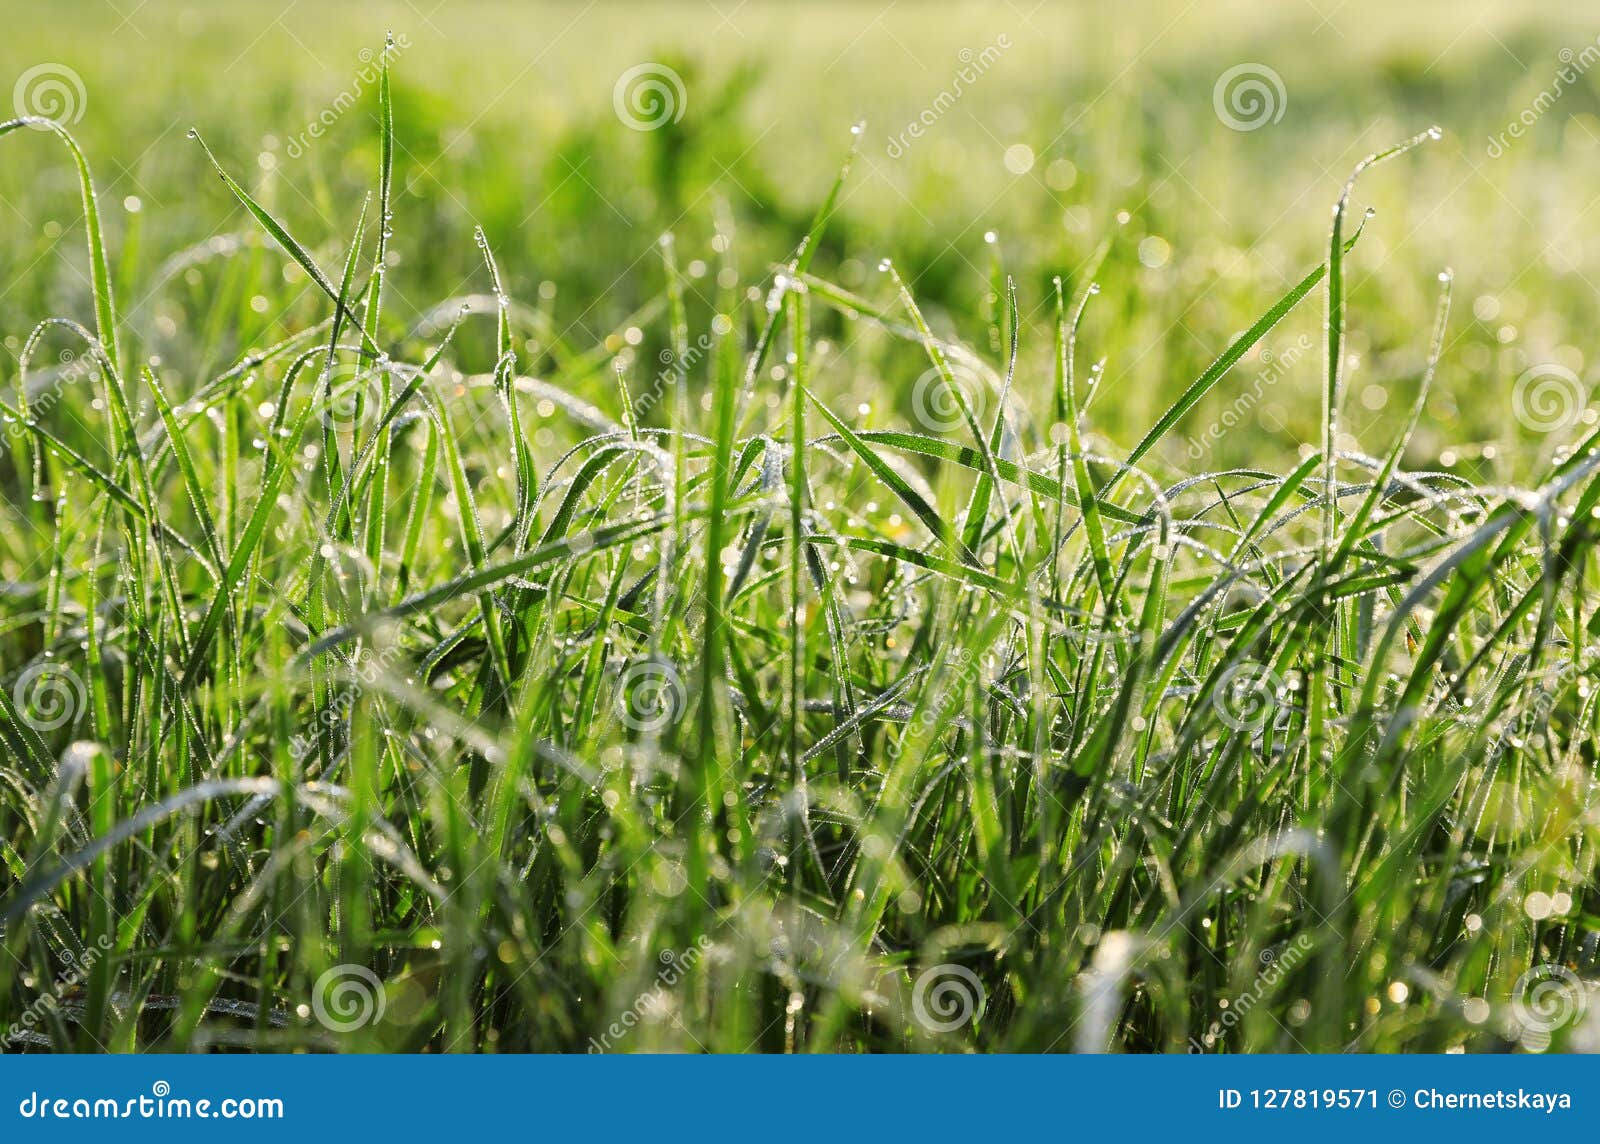 Dewy Green Grass on Wild Meadow Stock Image - Image of ecology, growing